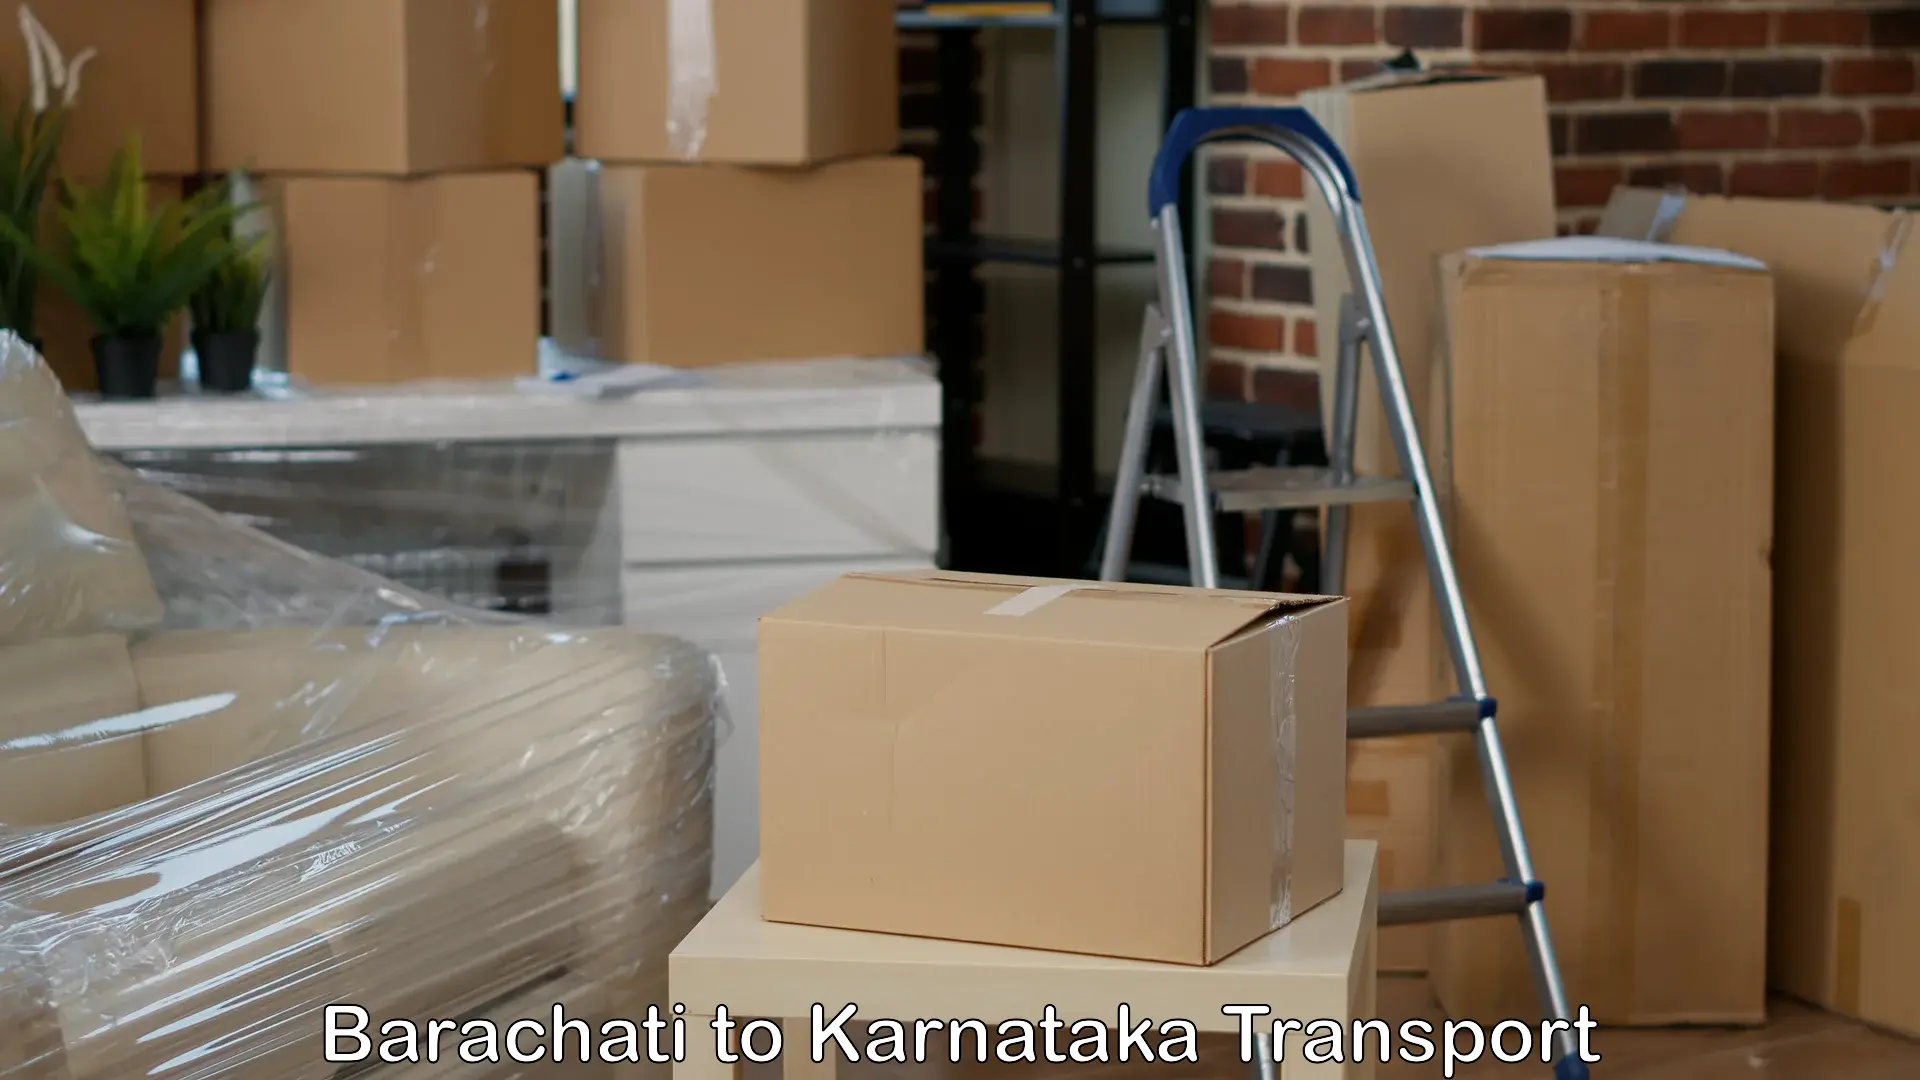 Goods delivery service Barachati to Kollegal